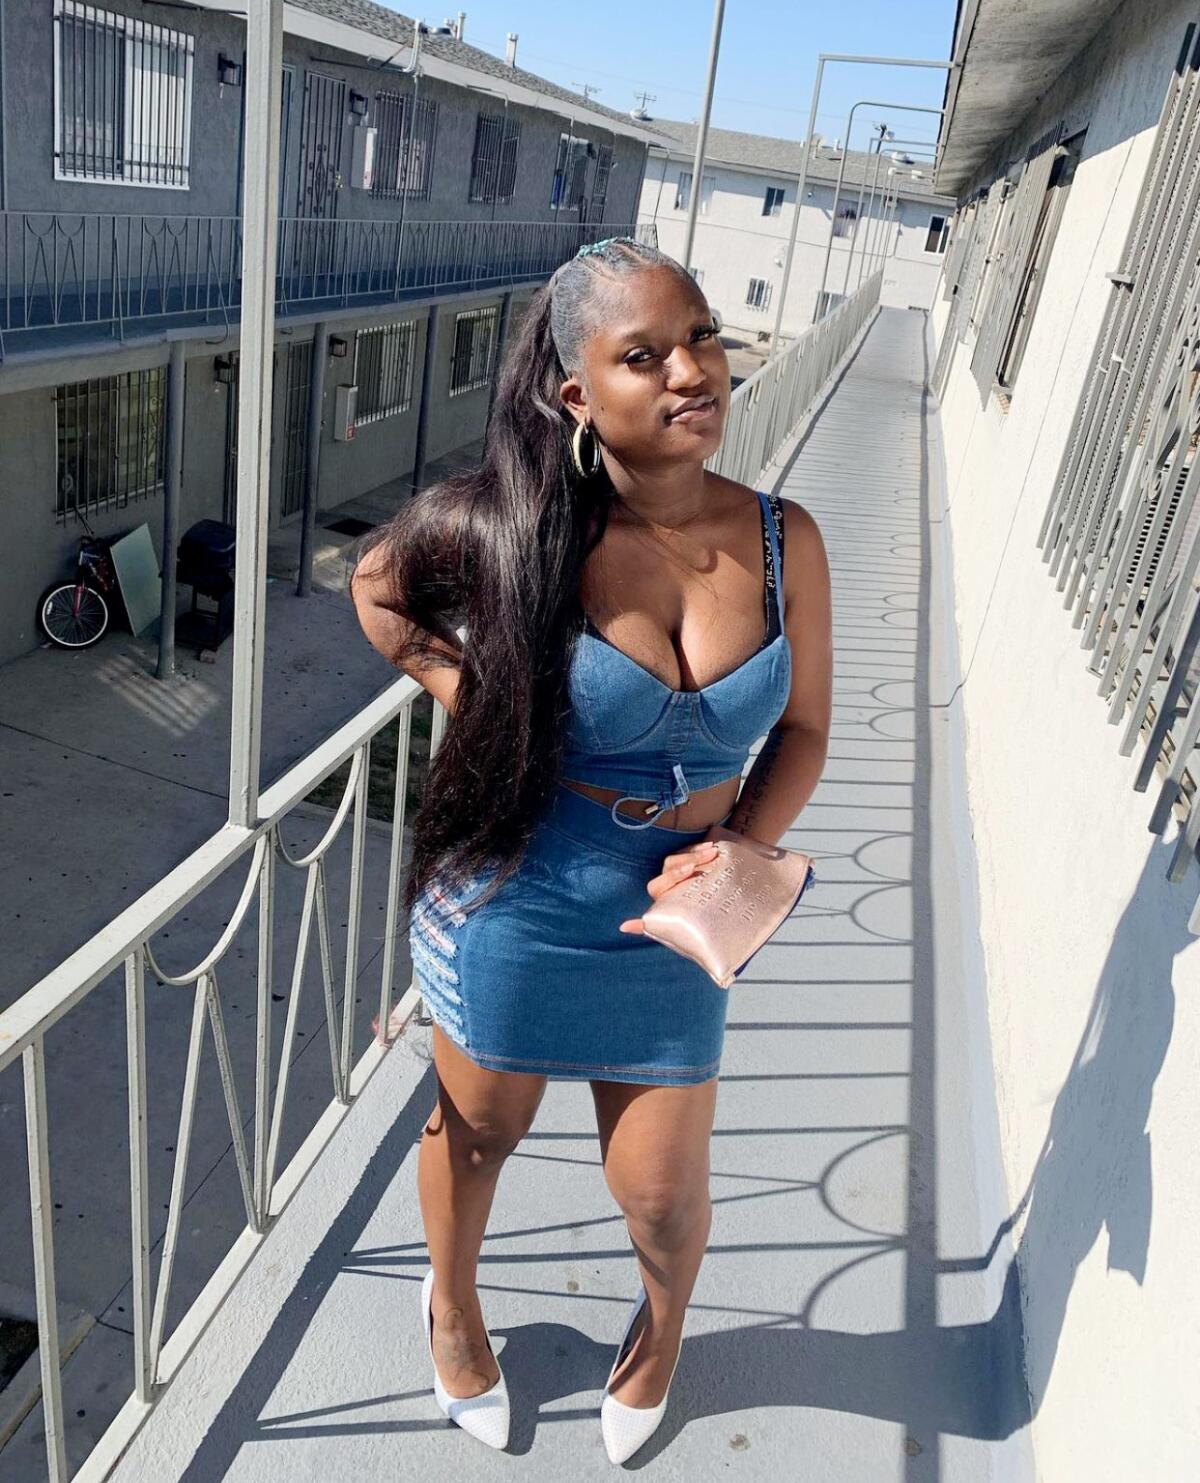 Asherey Ryan poses for a photo outside an apartment.